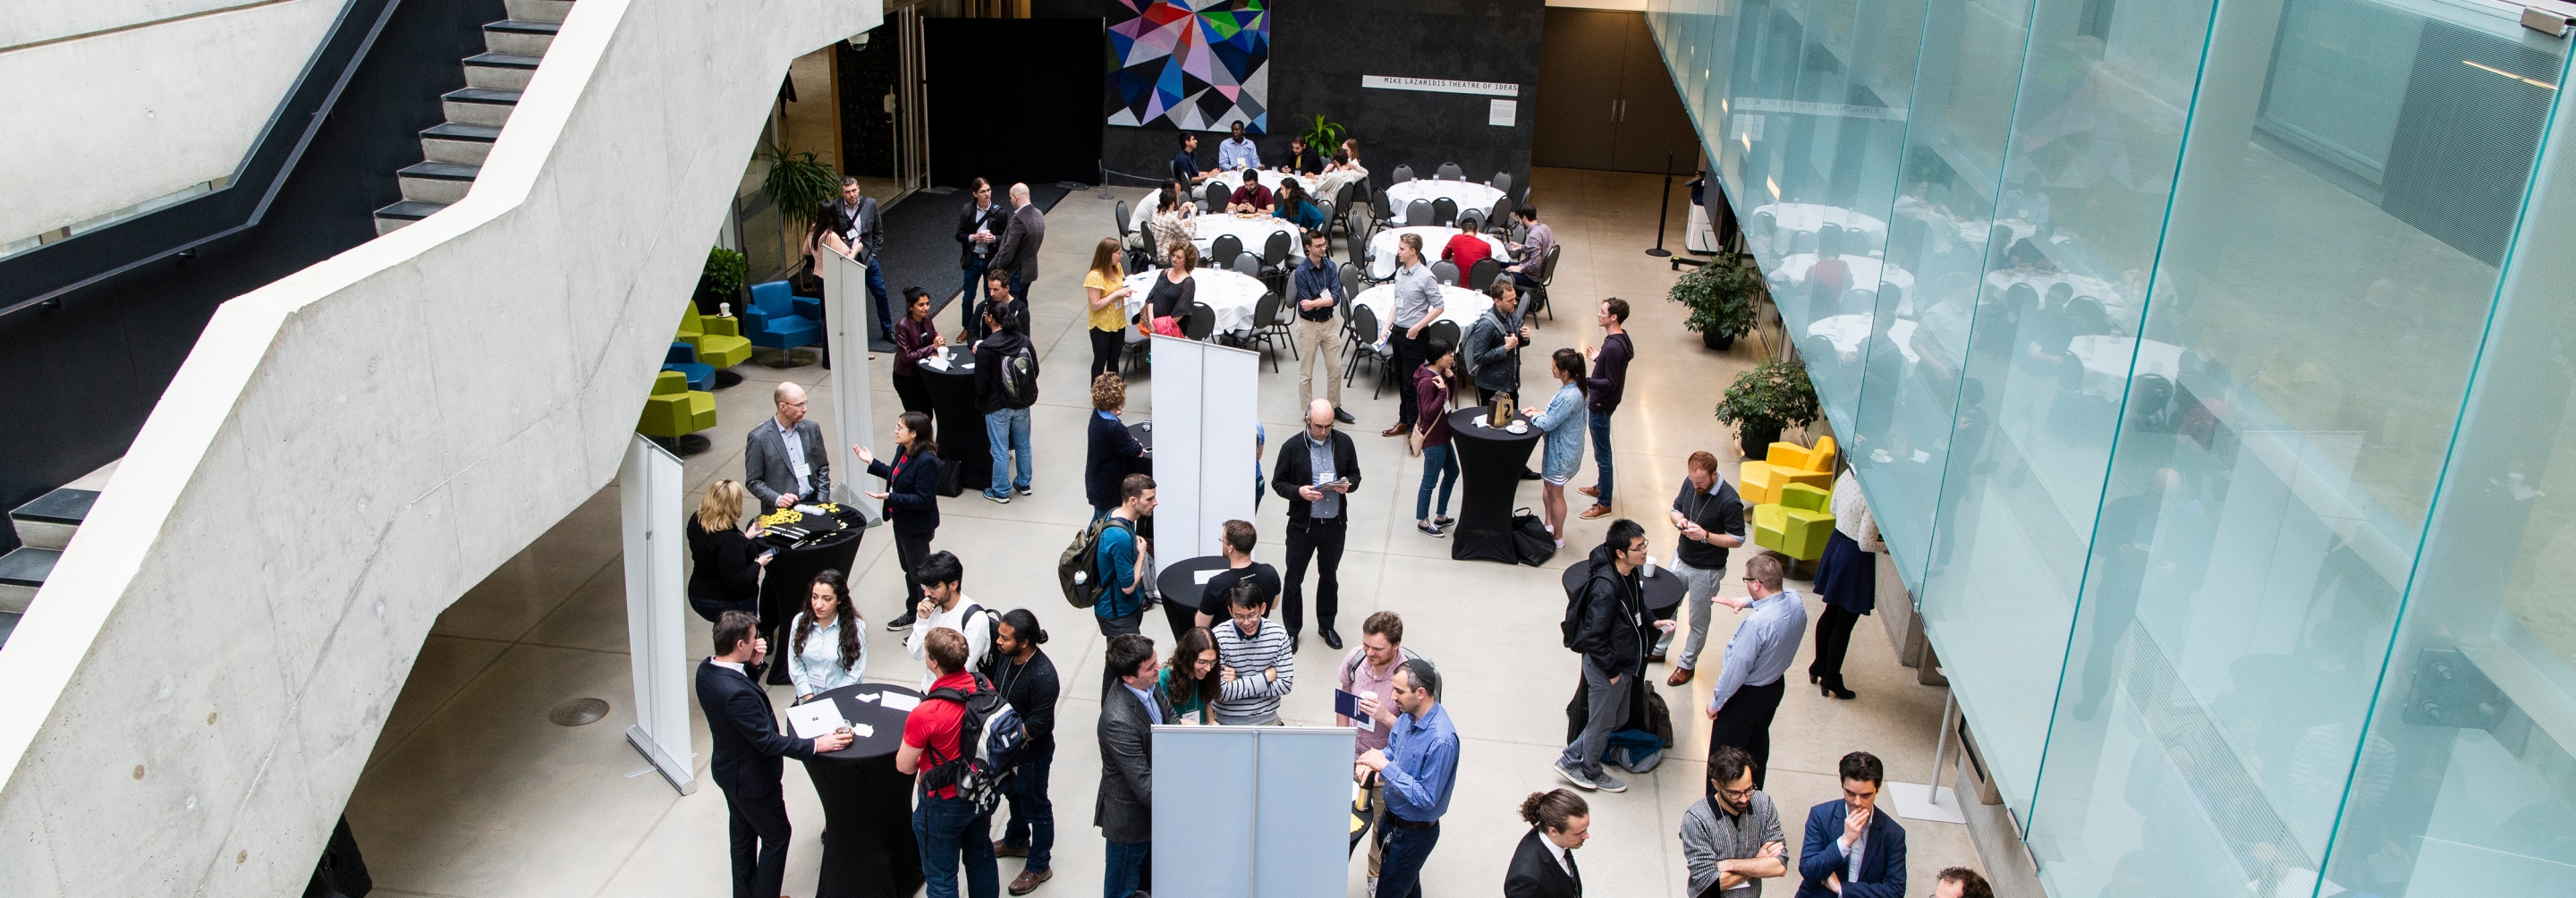 Aerial shot of groups of people interacting in an atrium